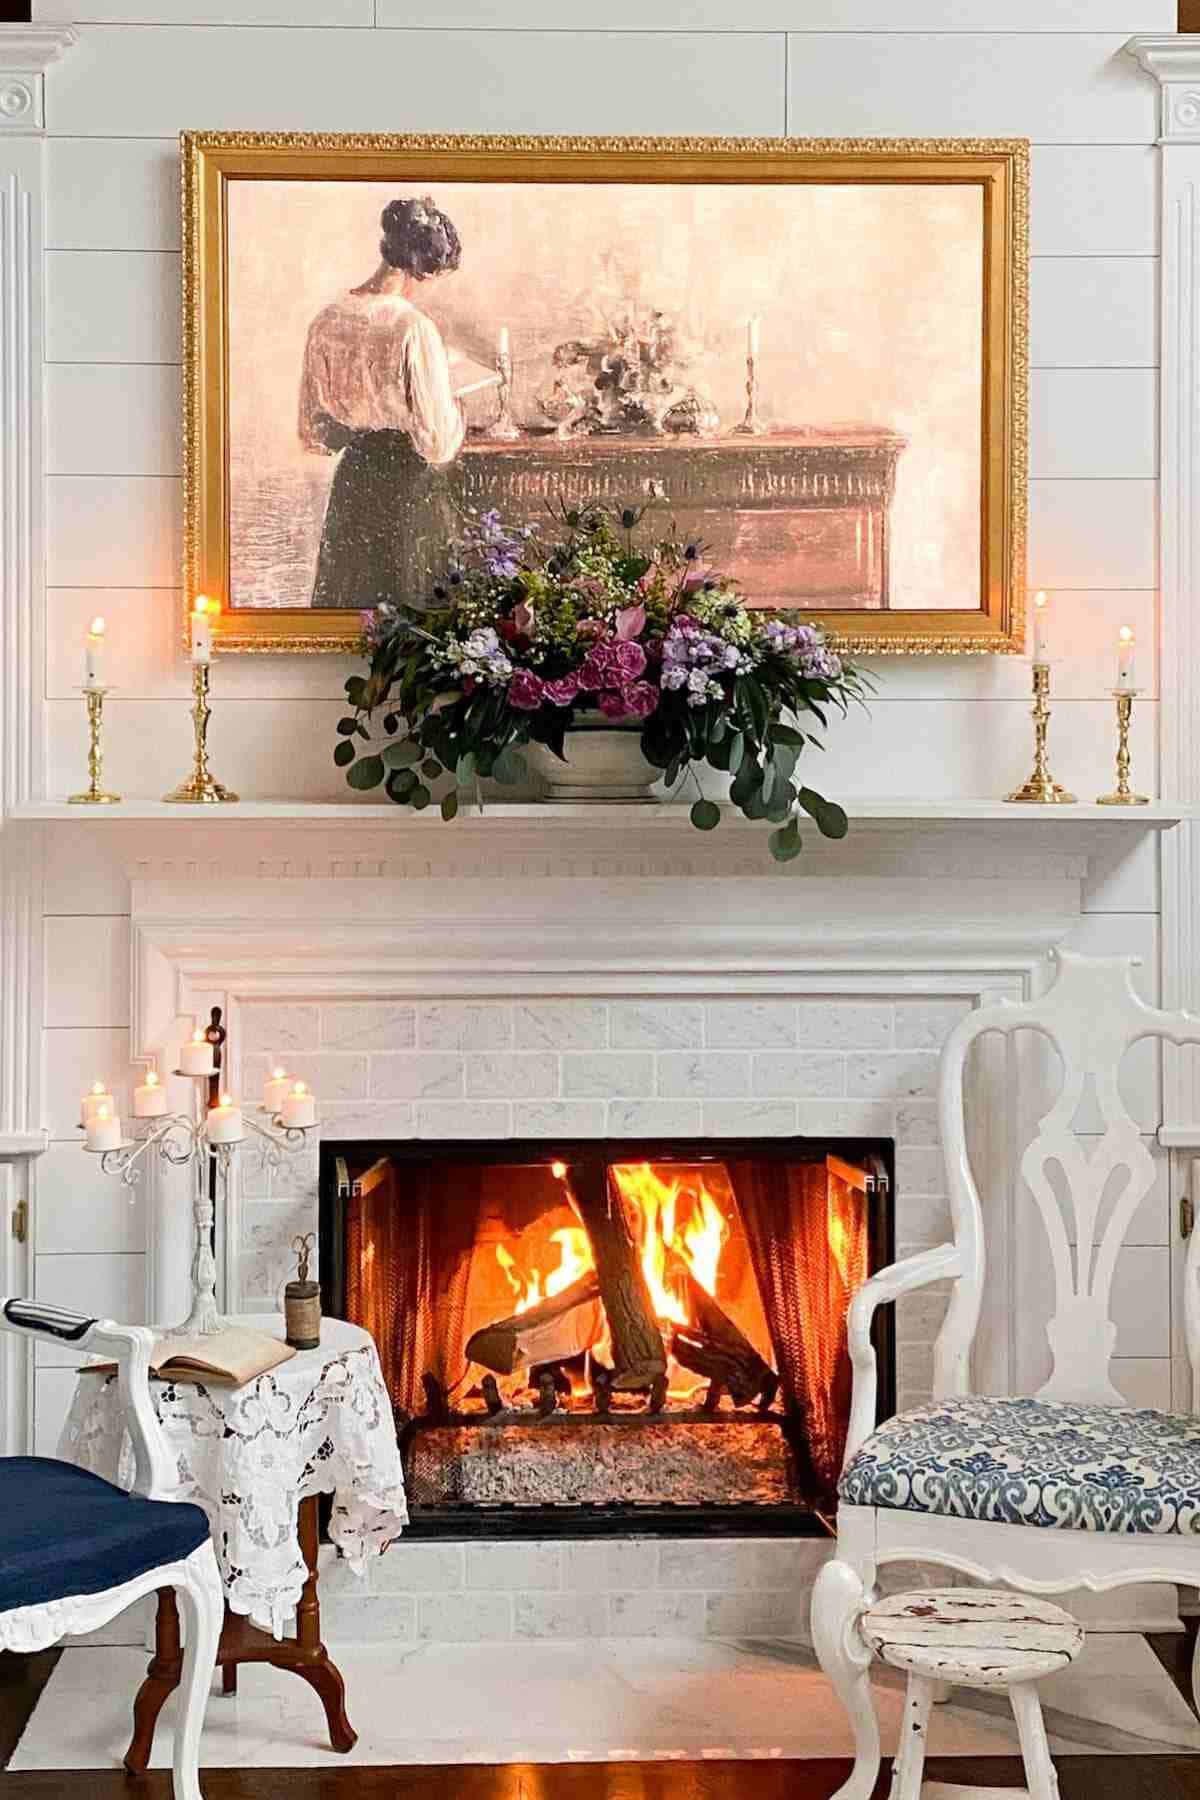 parlor decor with fireplace inspired by Emma by Jane Austen